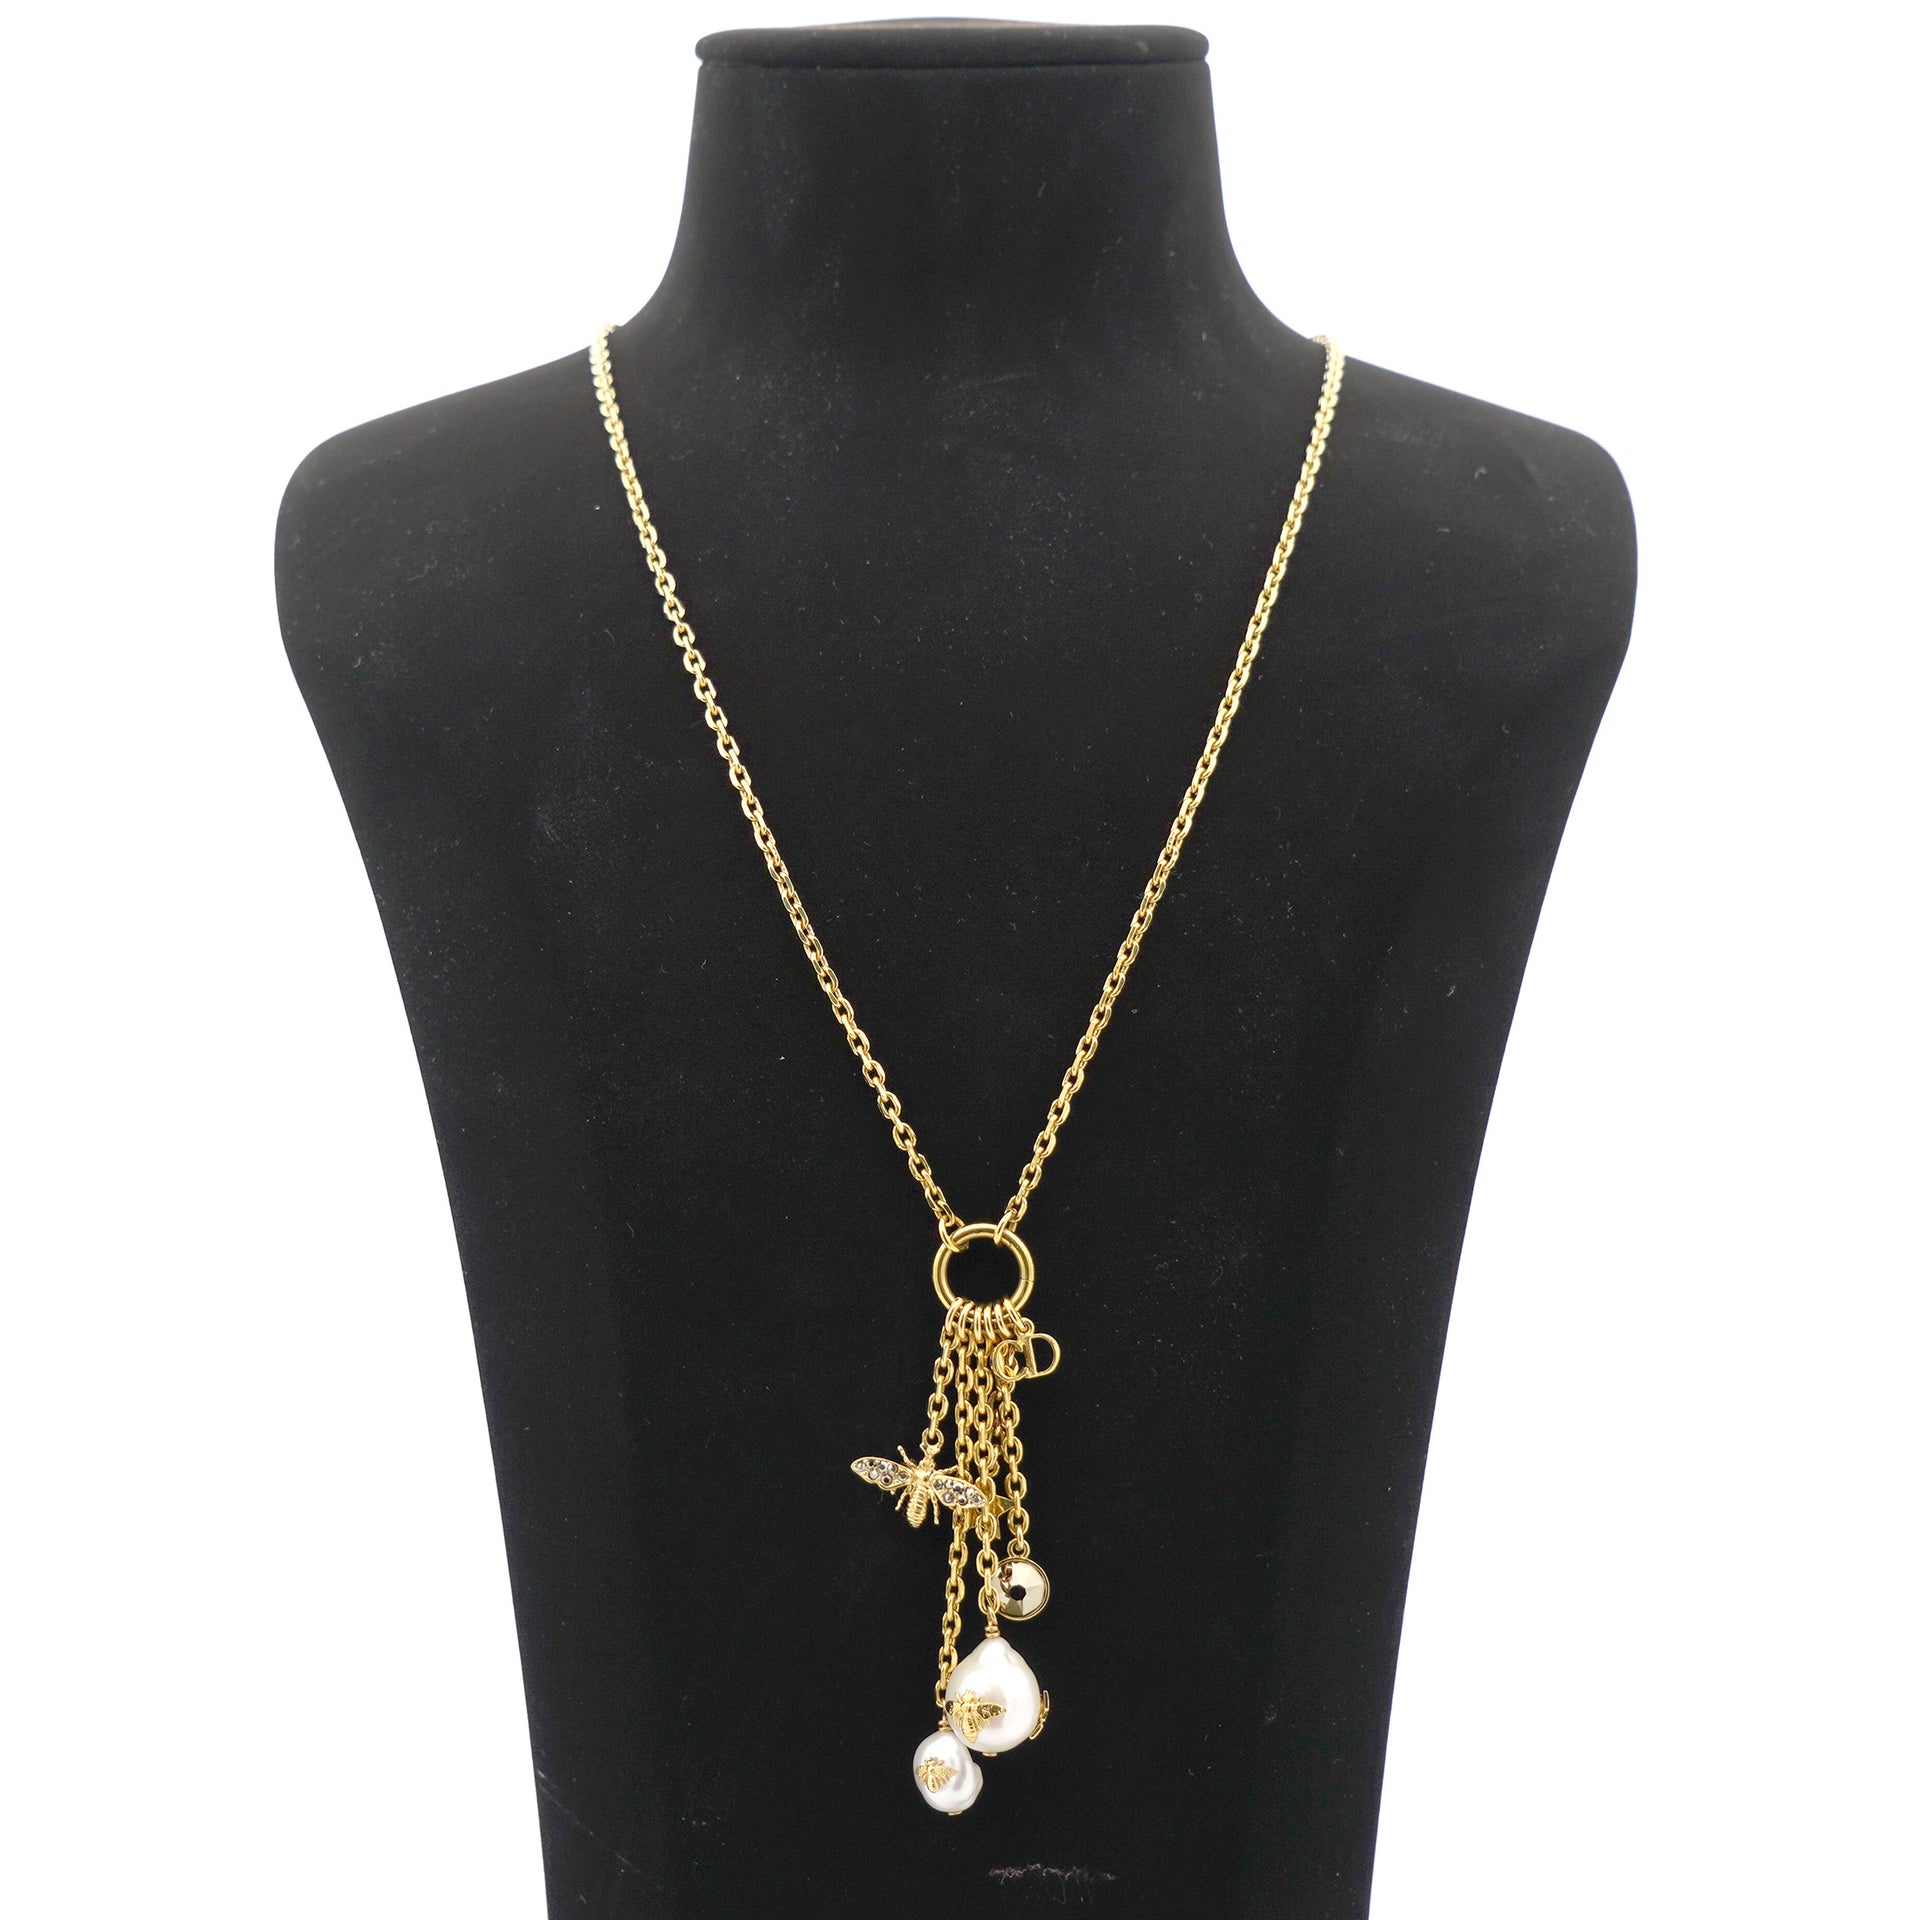 Gold-Finish Metal with a White Freshwater Pearl and Dark Crystals